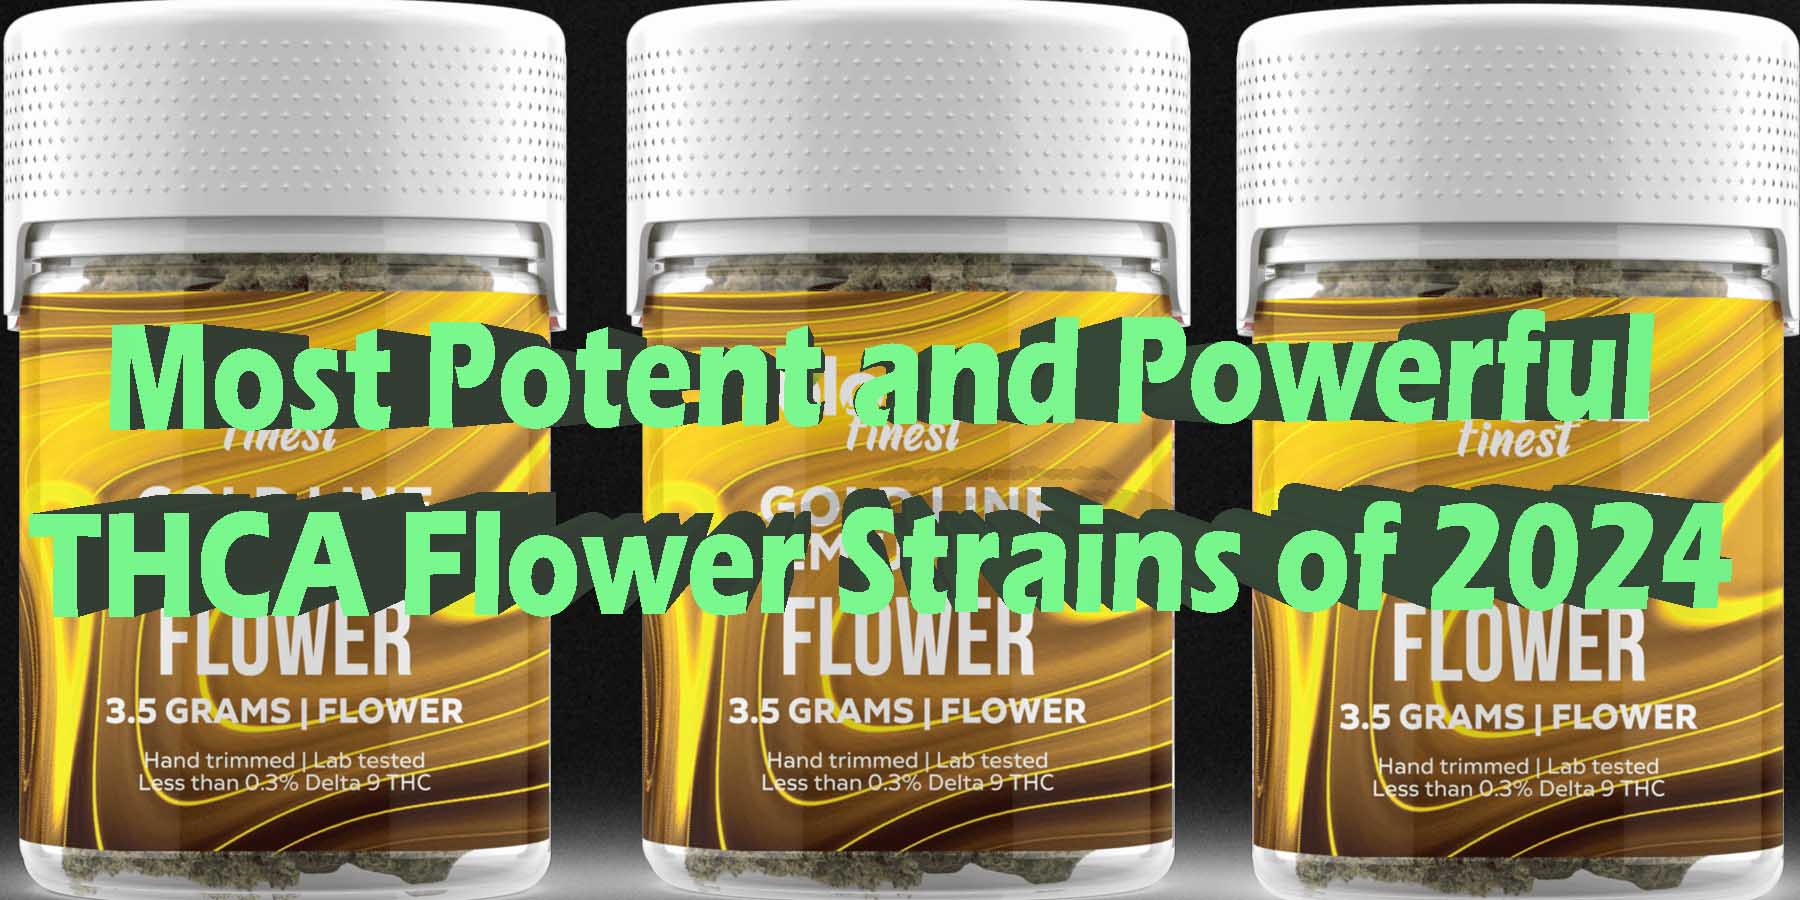 Most Potent and Powerful THCA Flower Strains of 2024 WhereToGet HowToGetNearMe BestPlace LowestPrice Coupon Discount For Smoking Best High Smoke Shop Online Binoid.